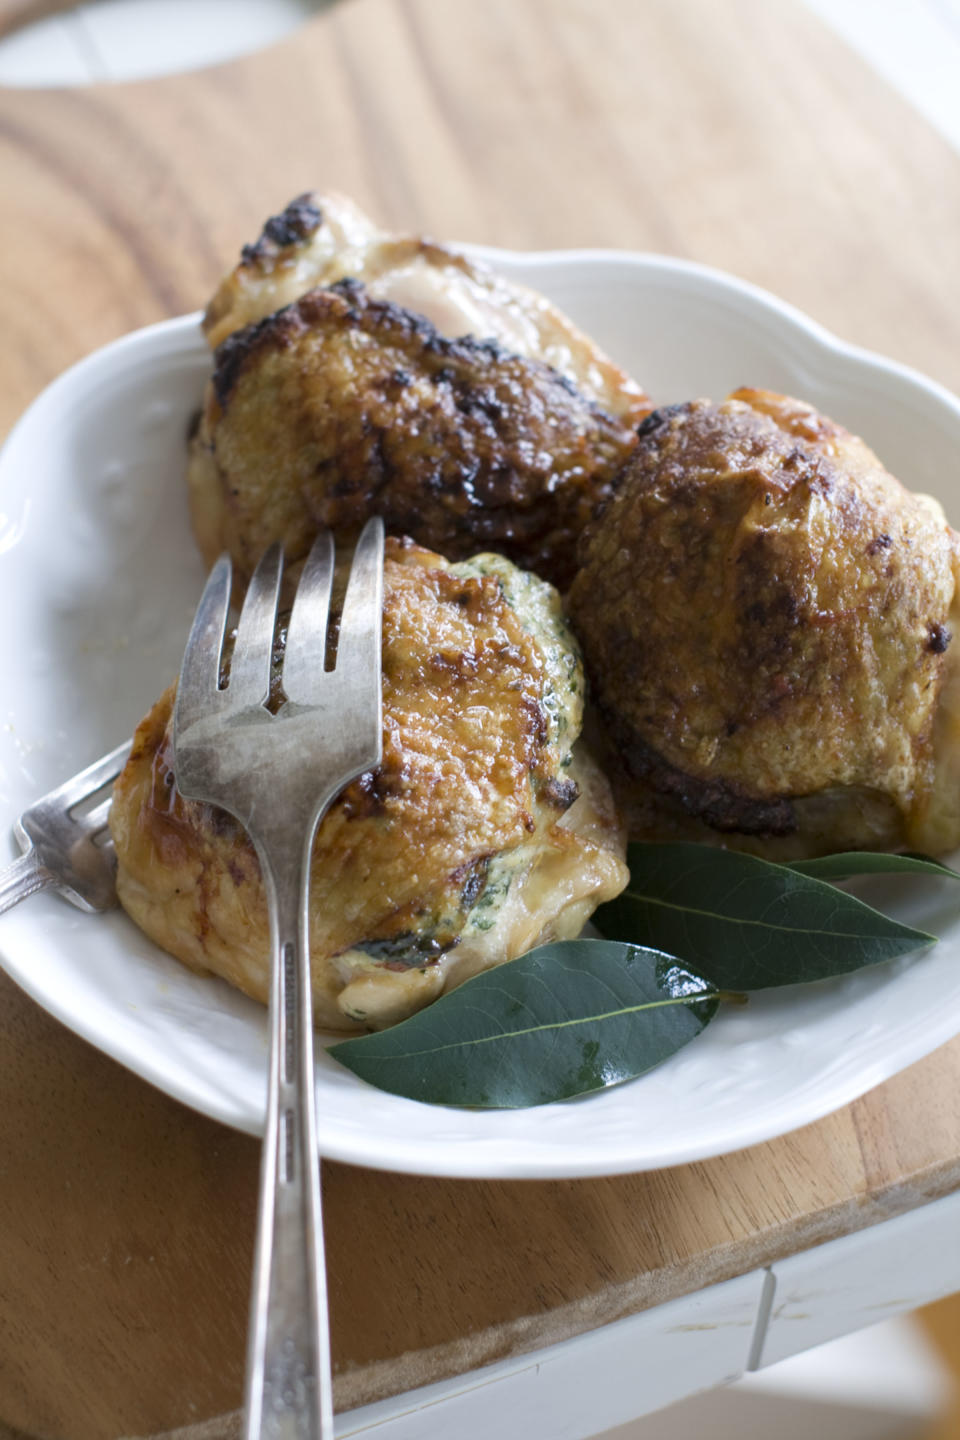 This Nov. 11, 2013 photo shows spinach stuffed chicken thighs in Concord, N.H. (AP Photo/Matthew Mead)